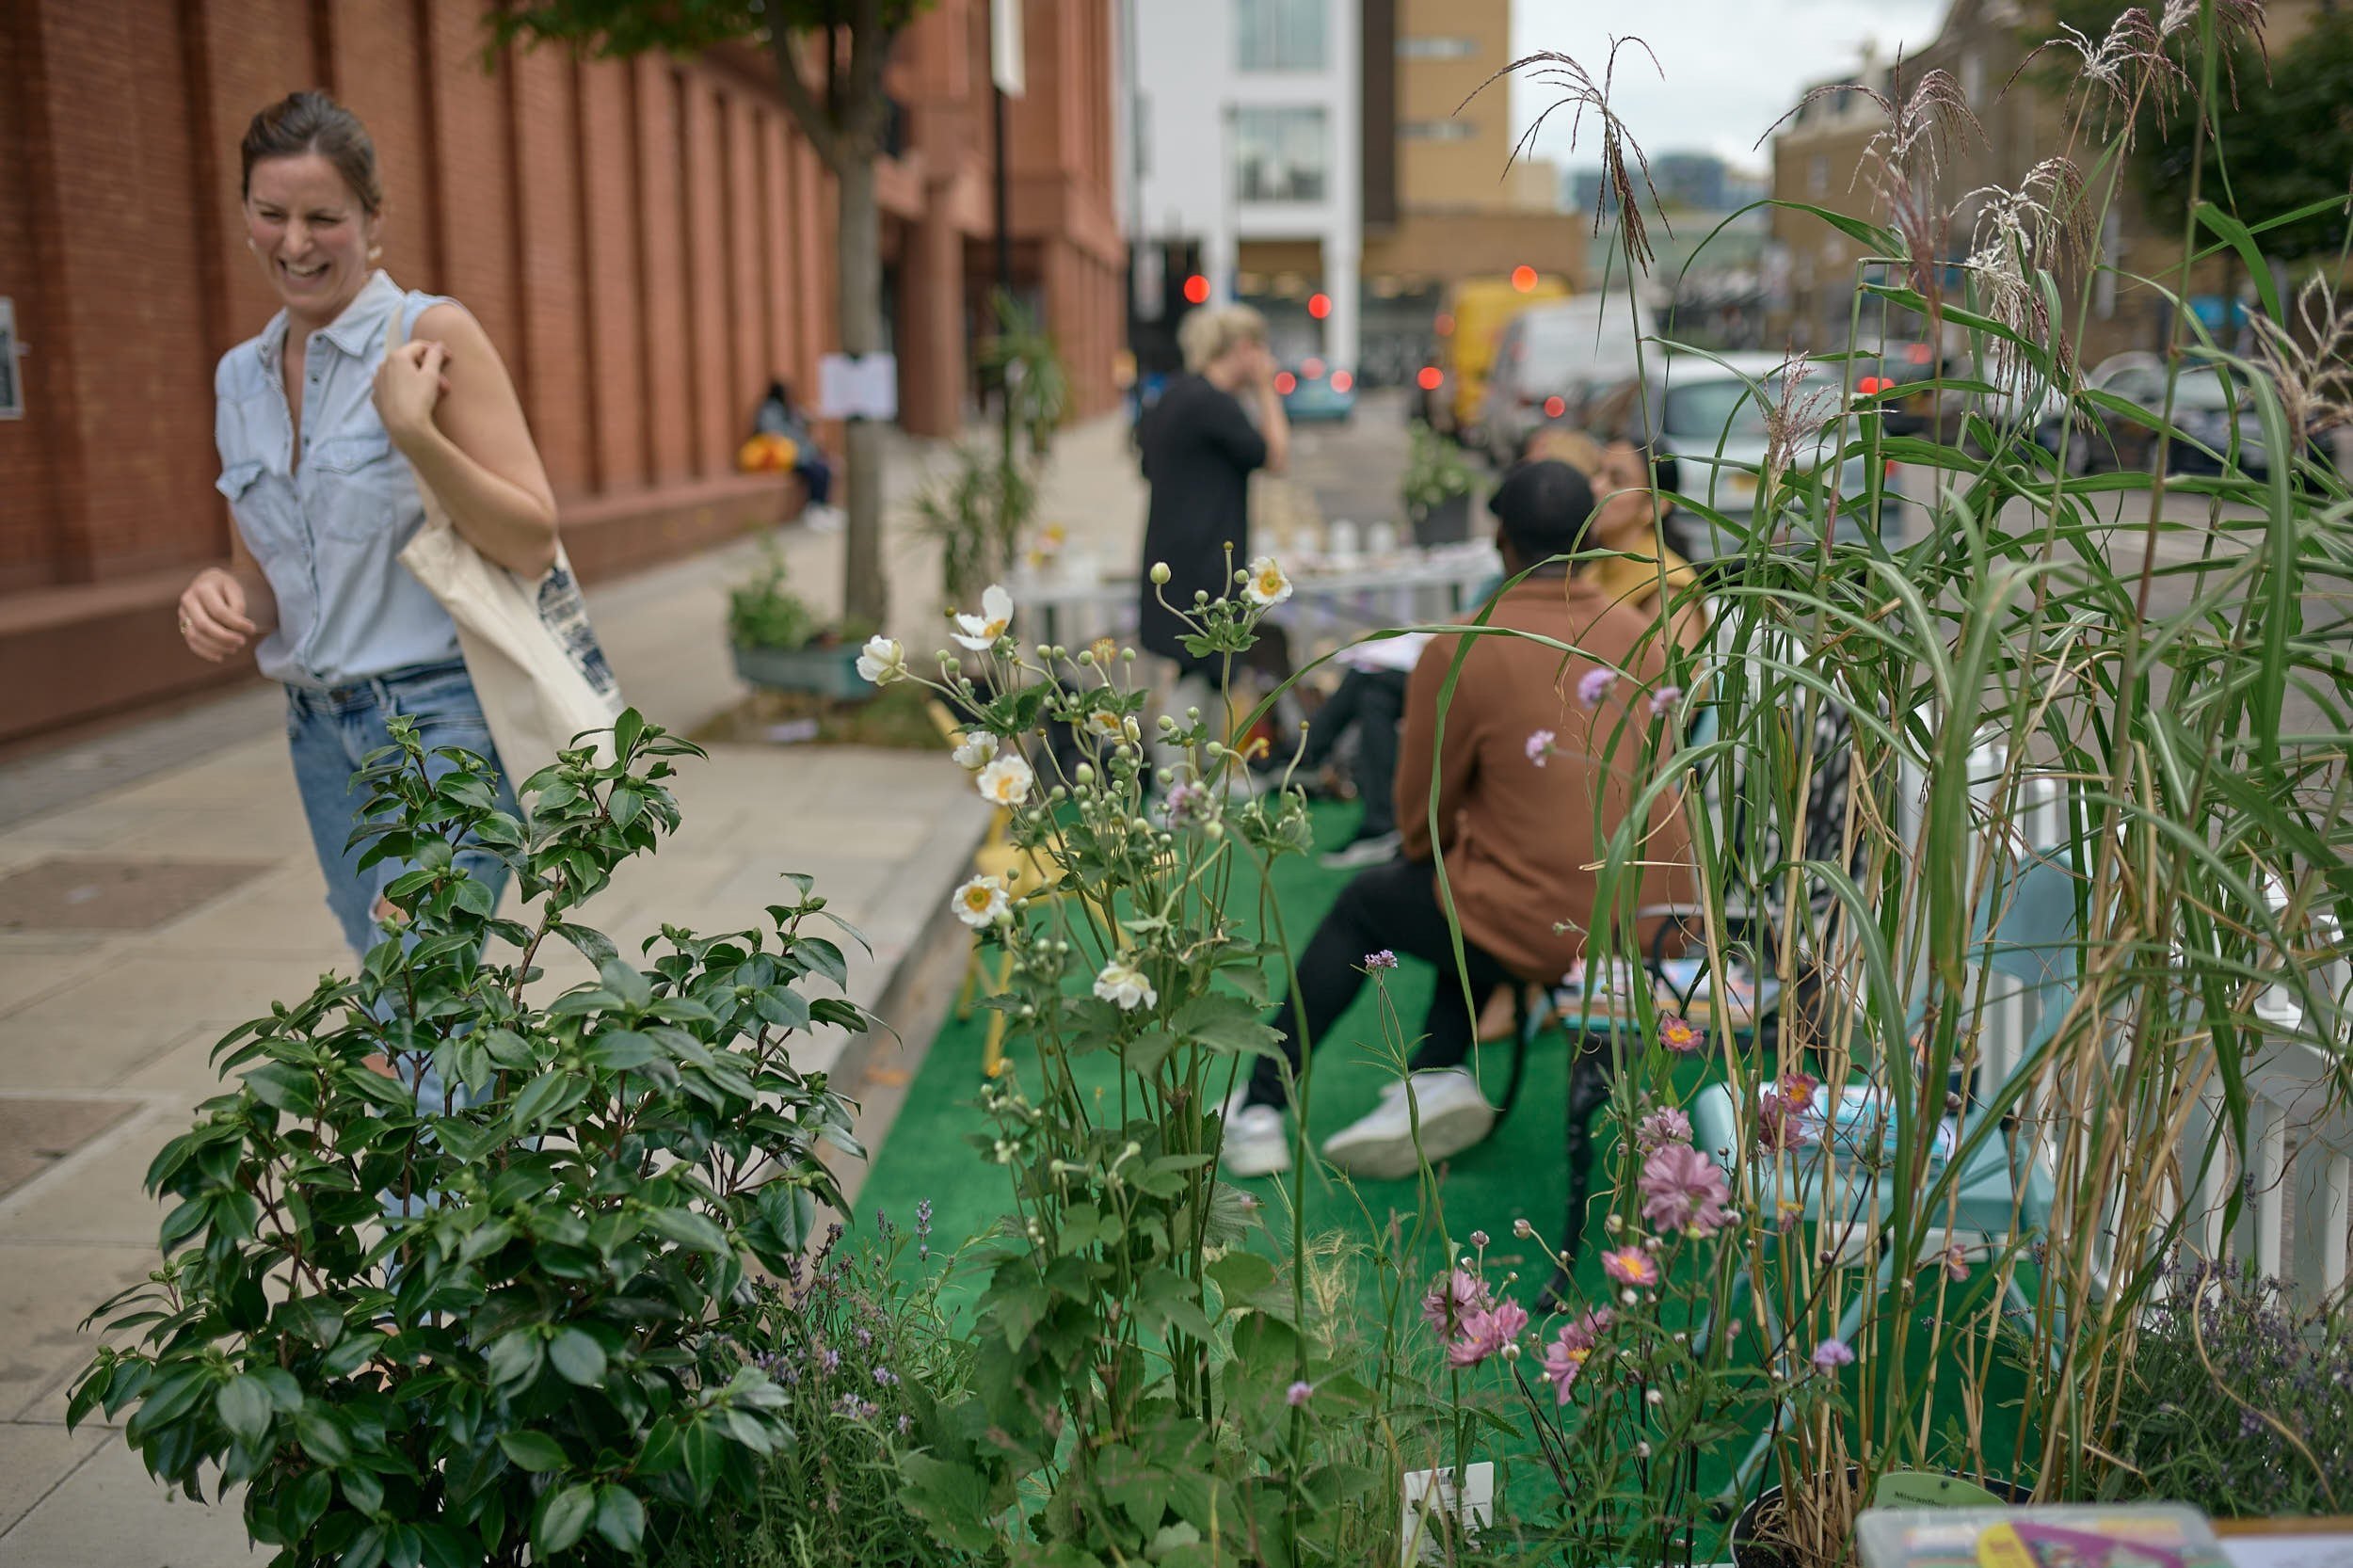 This parklet provides greenspace where local people can meet, rest, and socialise